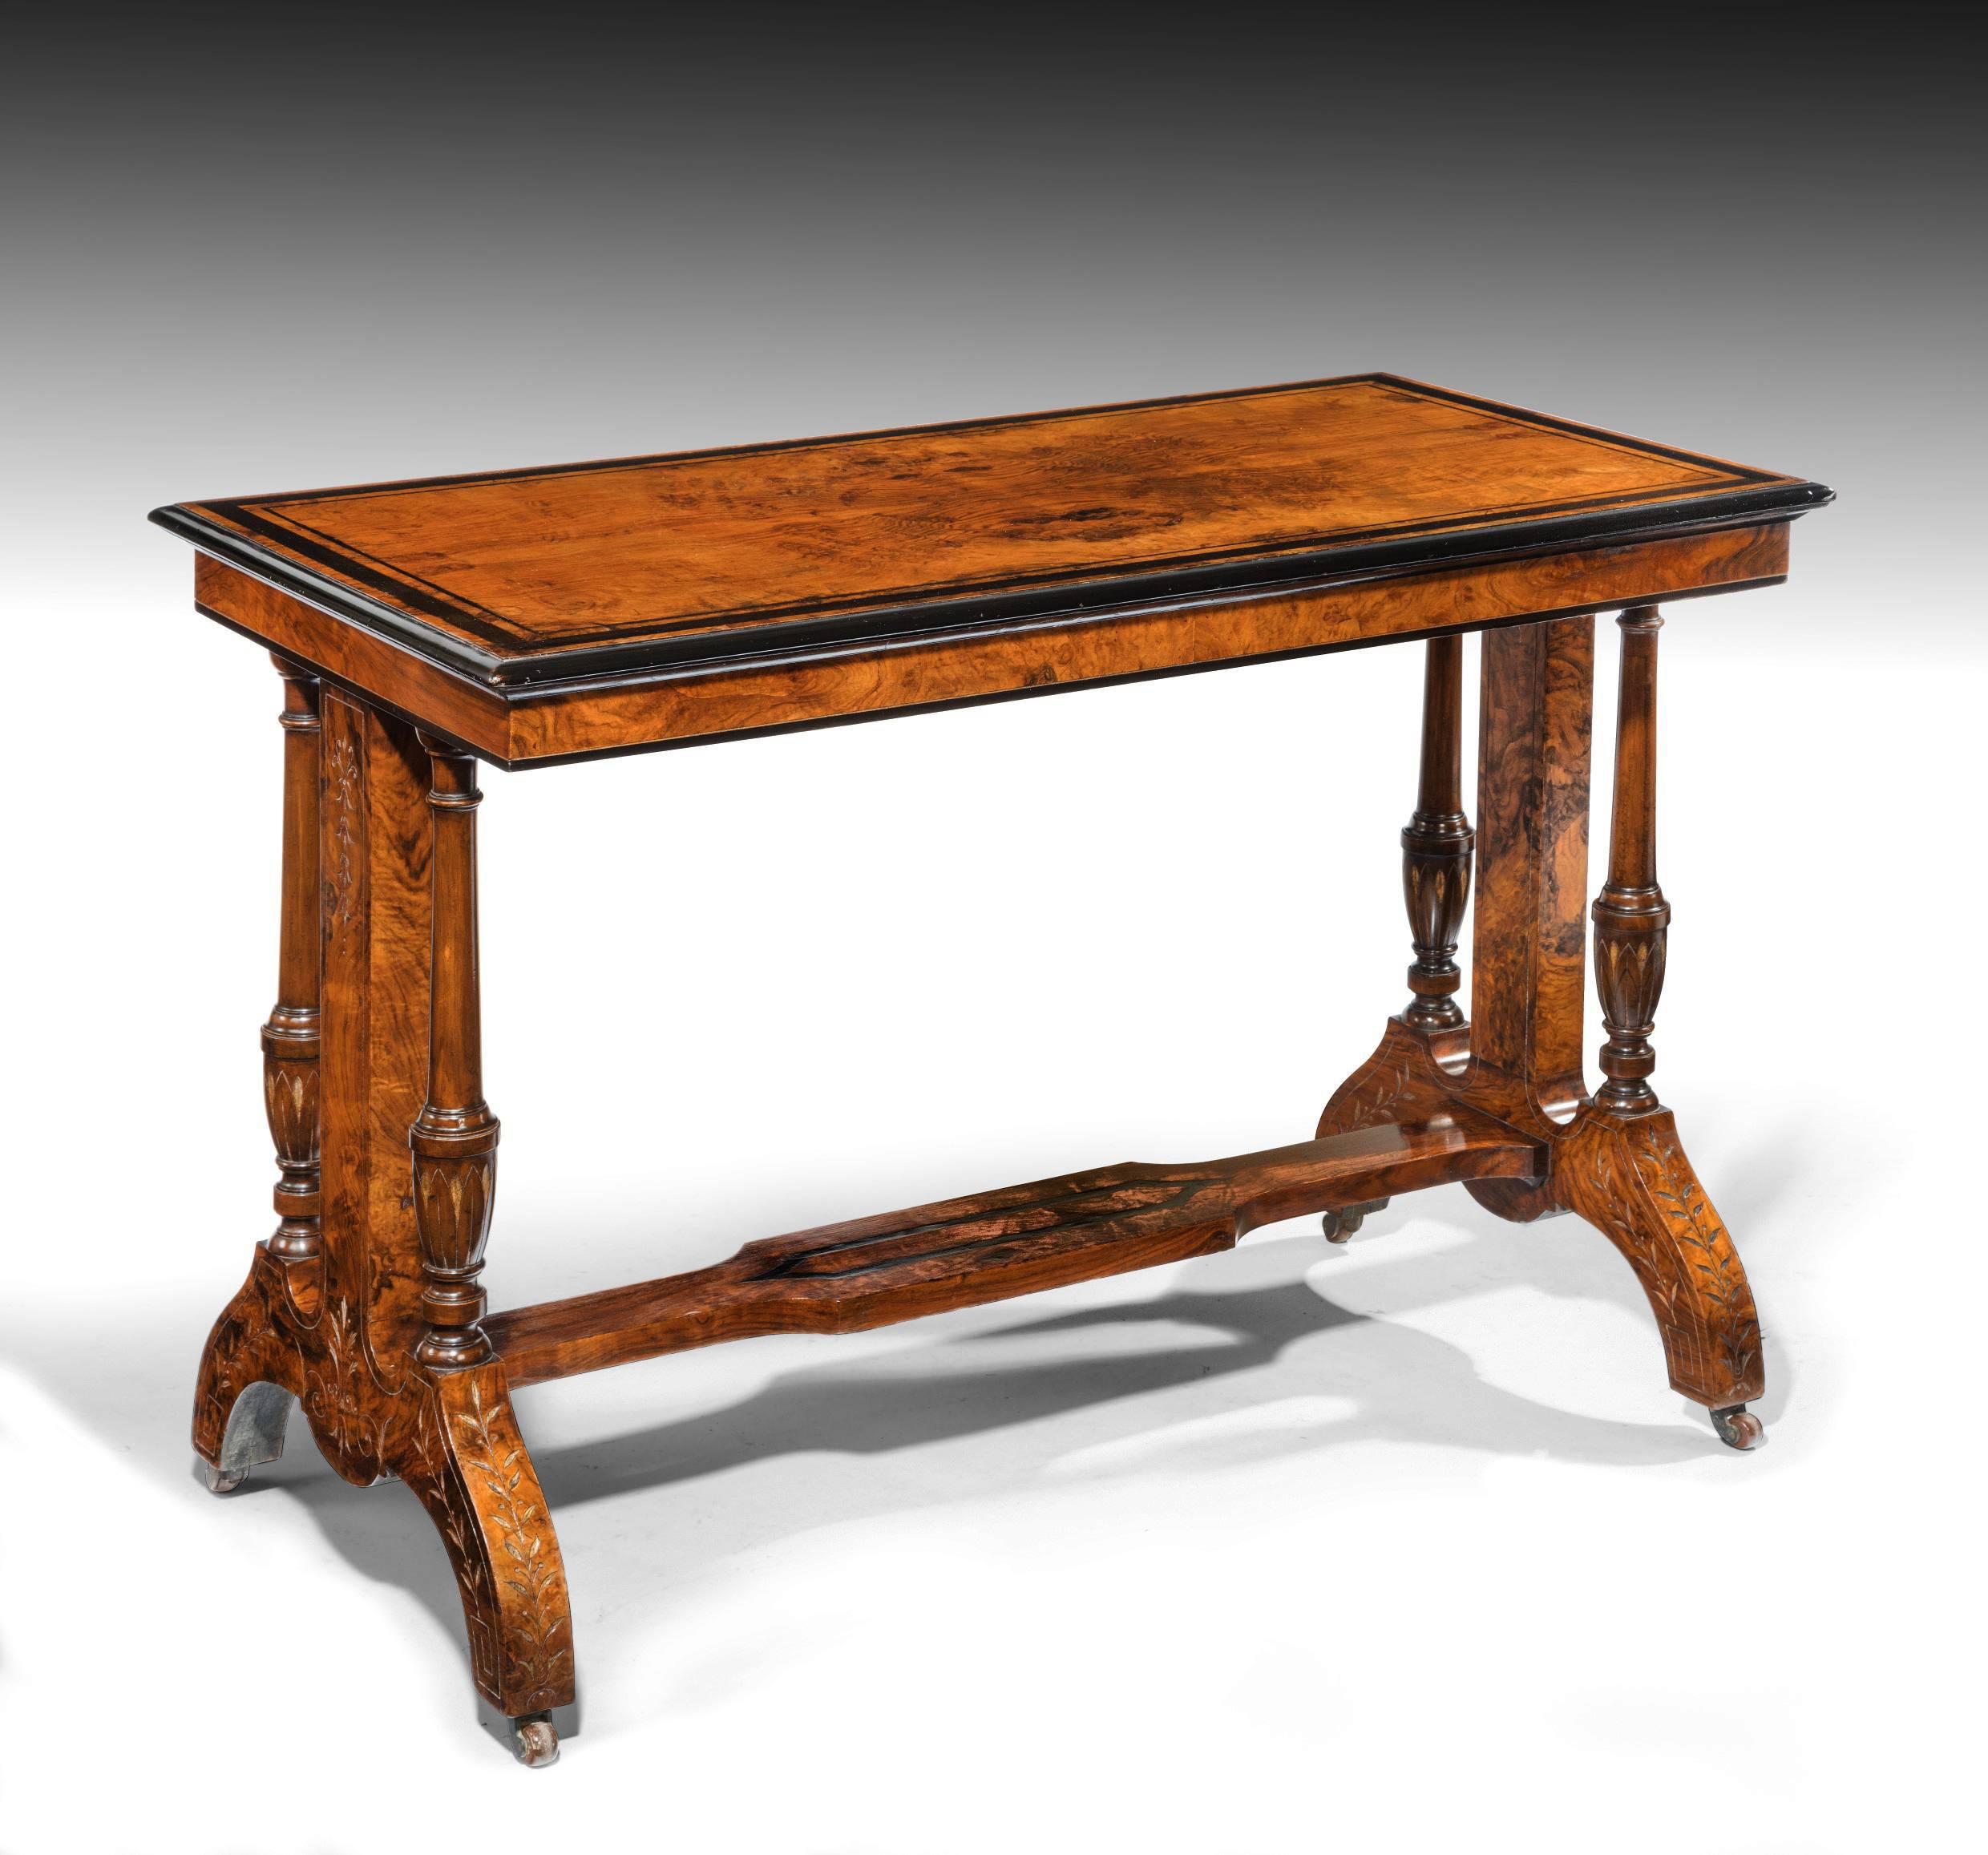 A quality Victorian figured walnut and ebony inlay table. 
Extremely well constructed using good carving and fine veneers this Victorian table dates to circa 1860. 
The rectangular top being in figured walnut having ebony inlay and banding with an